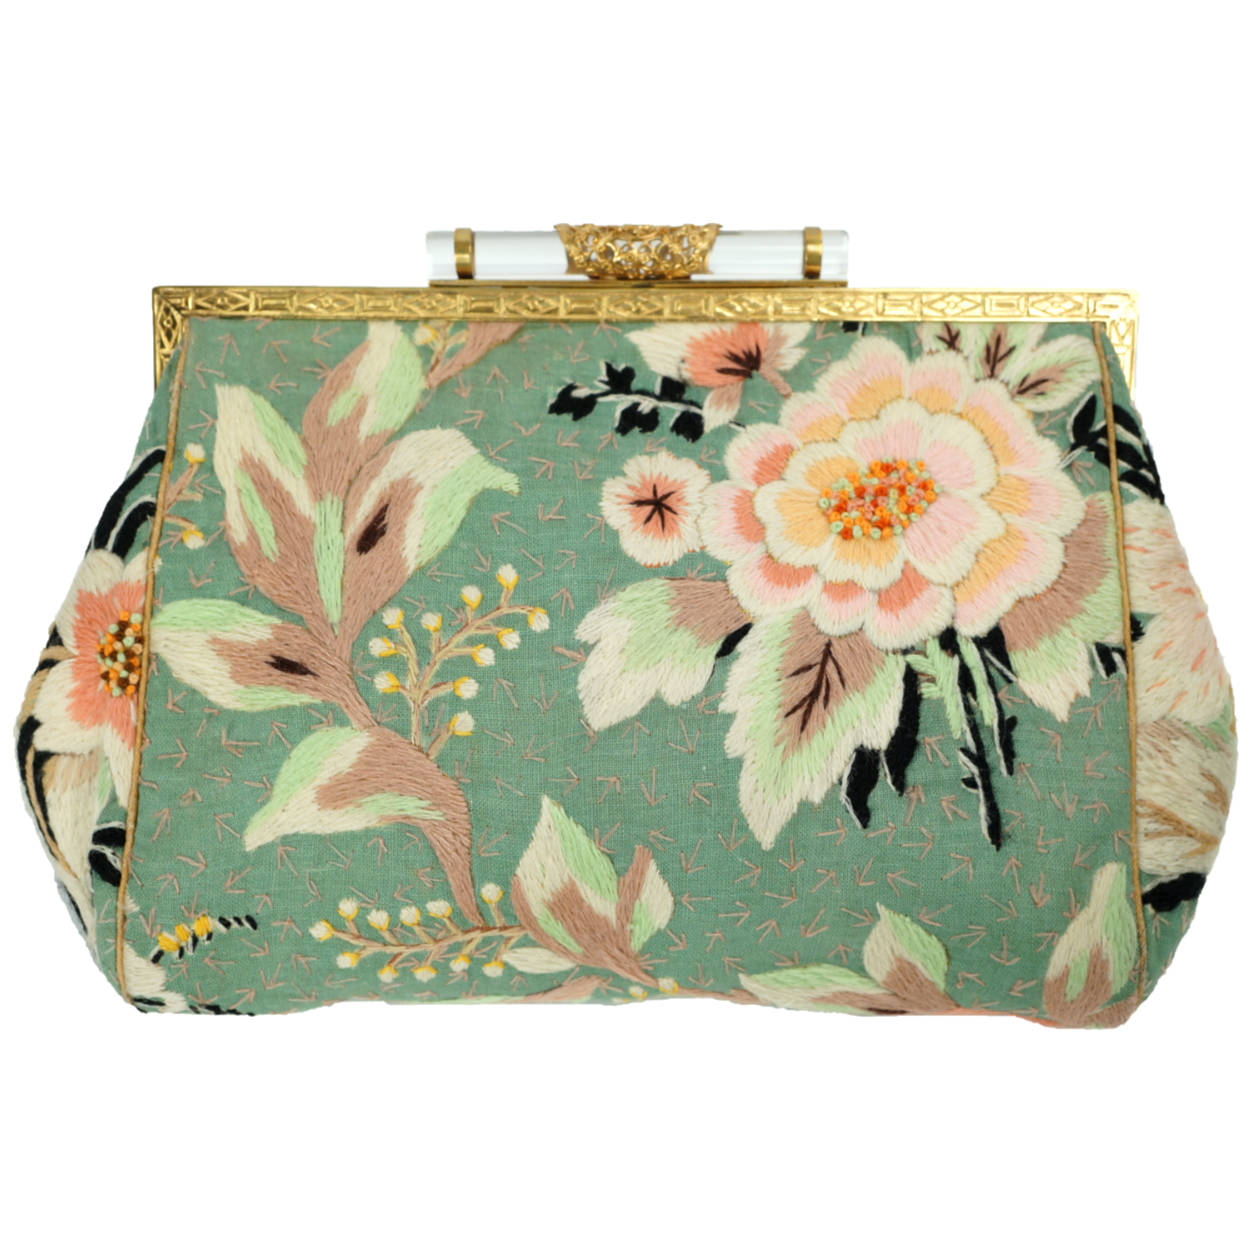 1930s Clutch Bags Hotsell, 57% OFF ...